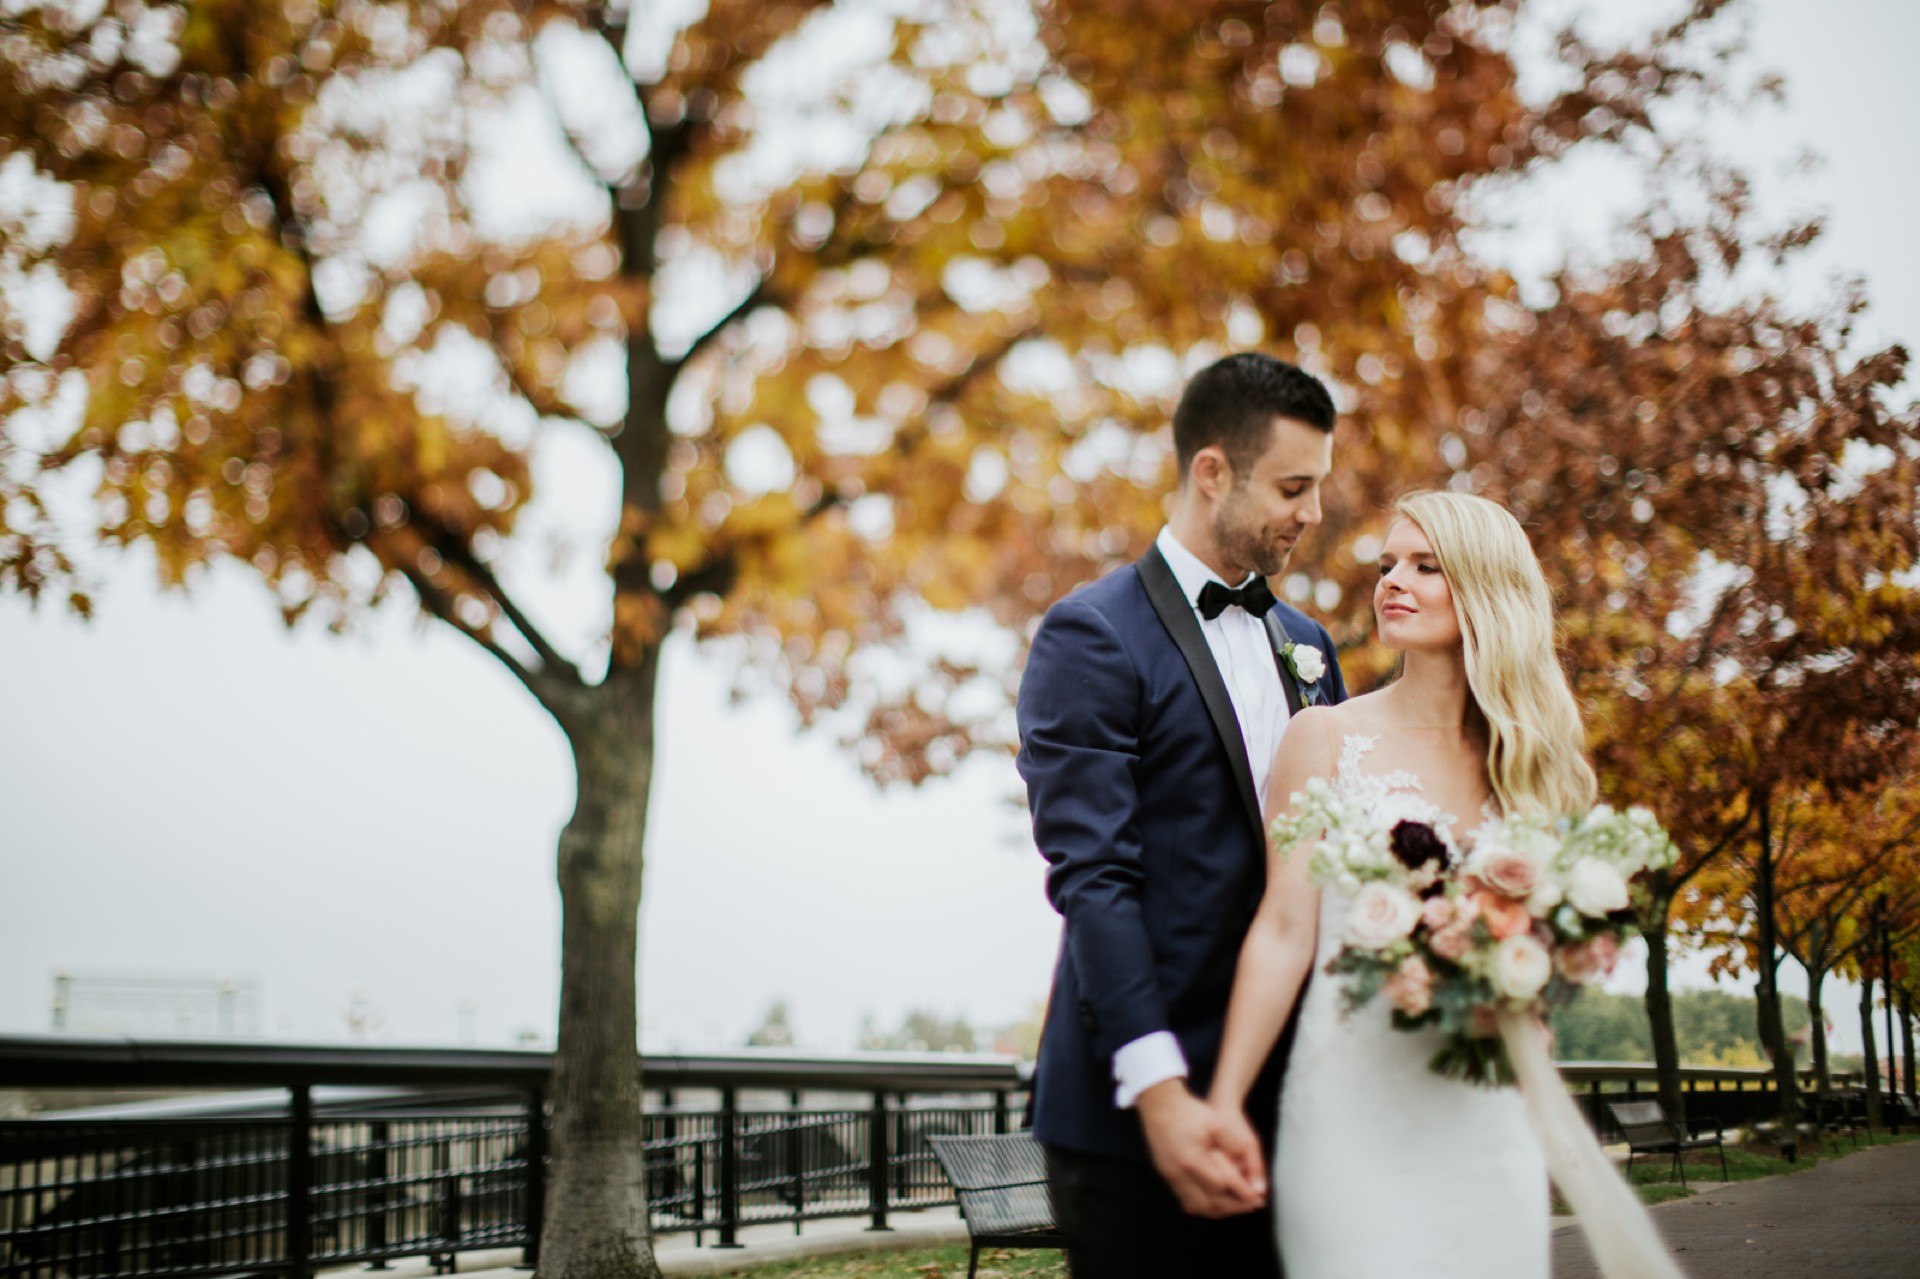 stunning freelensing photo of a bride and groom in the white river park holding hands, the bride's face is in focus but not much else in the photo and leaves on the trees behind them are fading from a brilliant orange to a brown